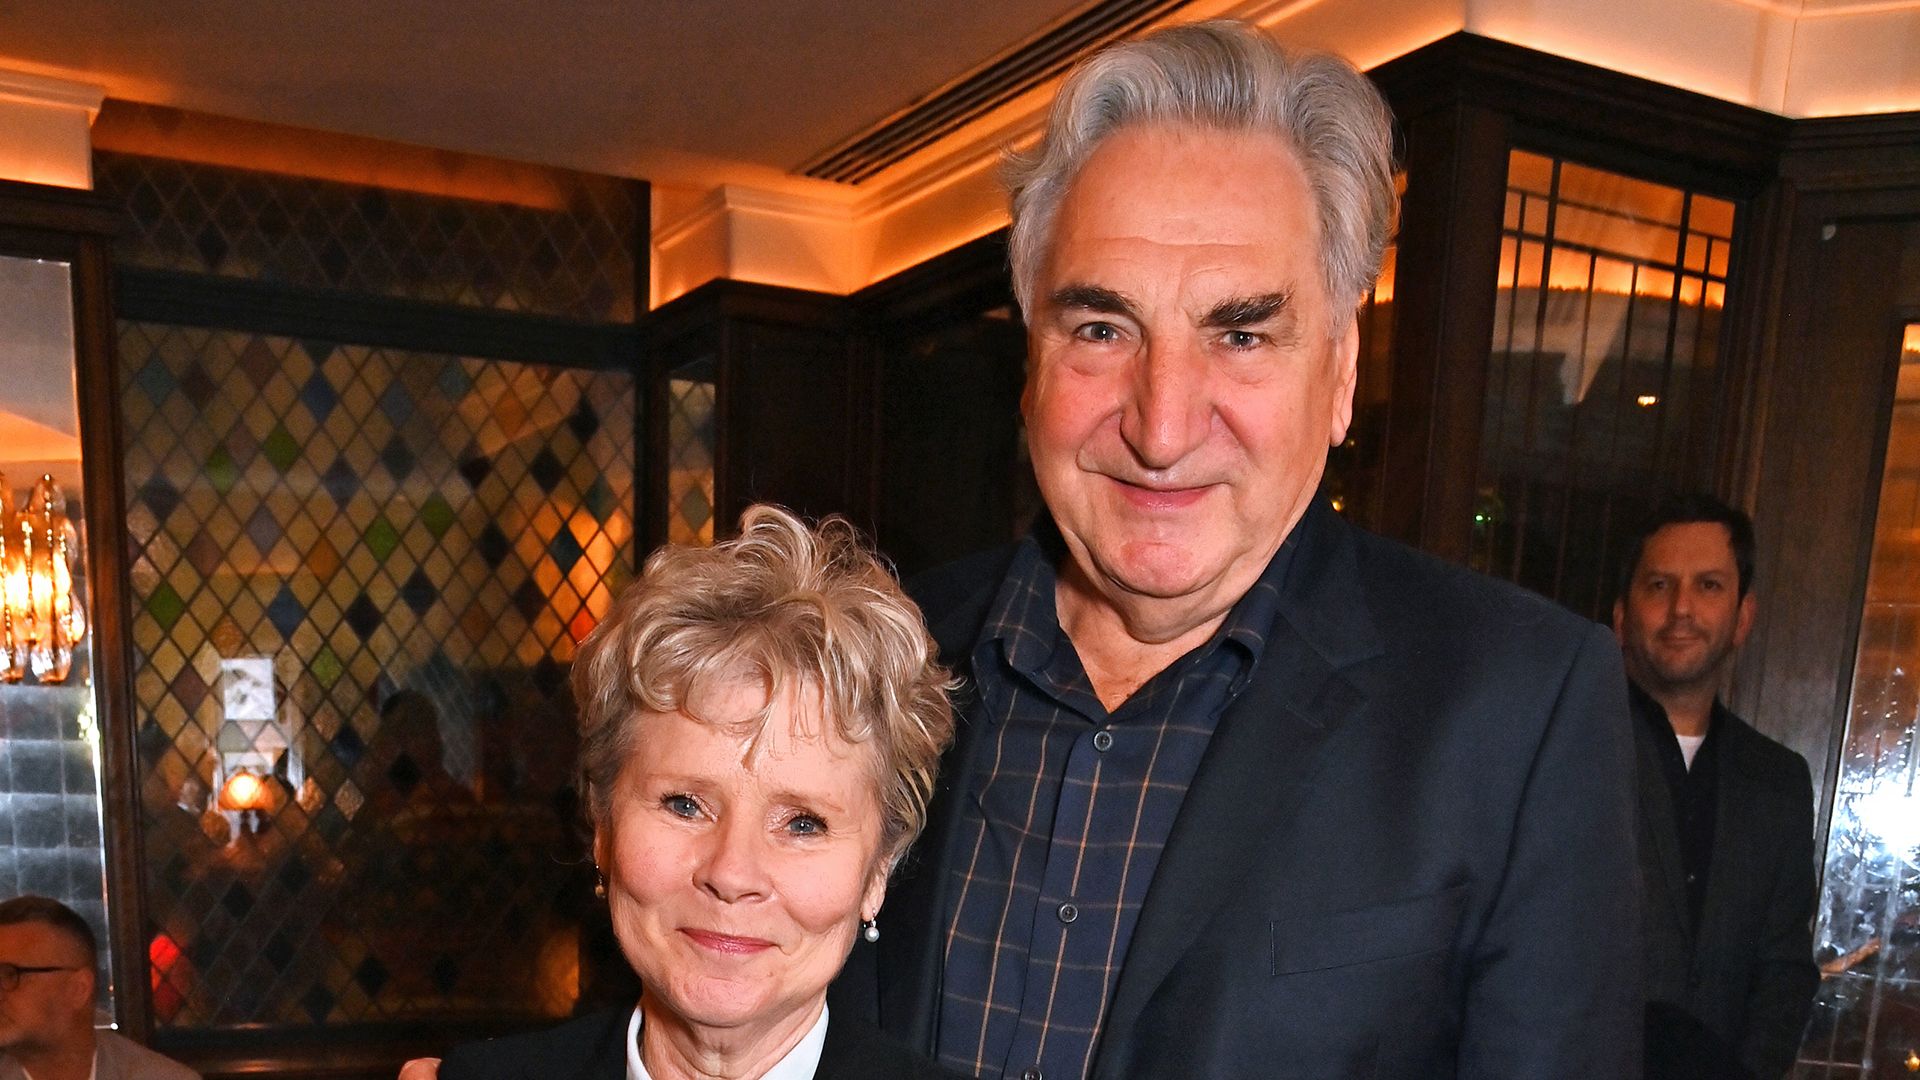 Jim Carter and Imelda Staunton cuddle up at the One Night Only event at The Ivy West Street